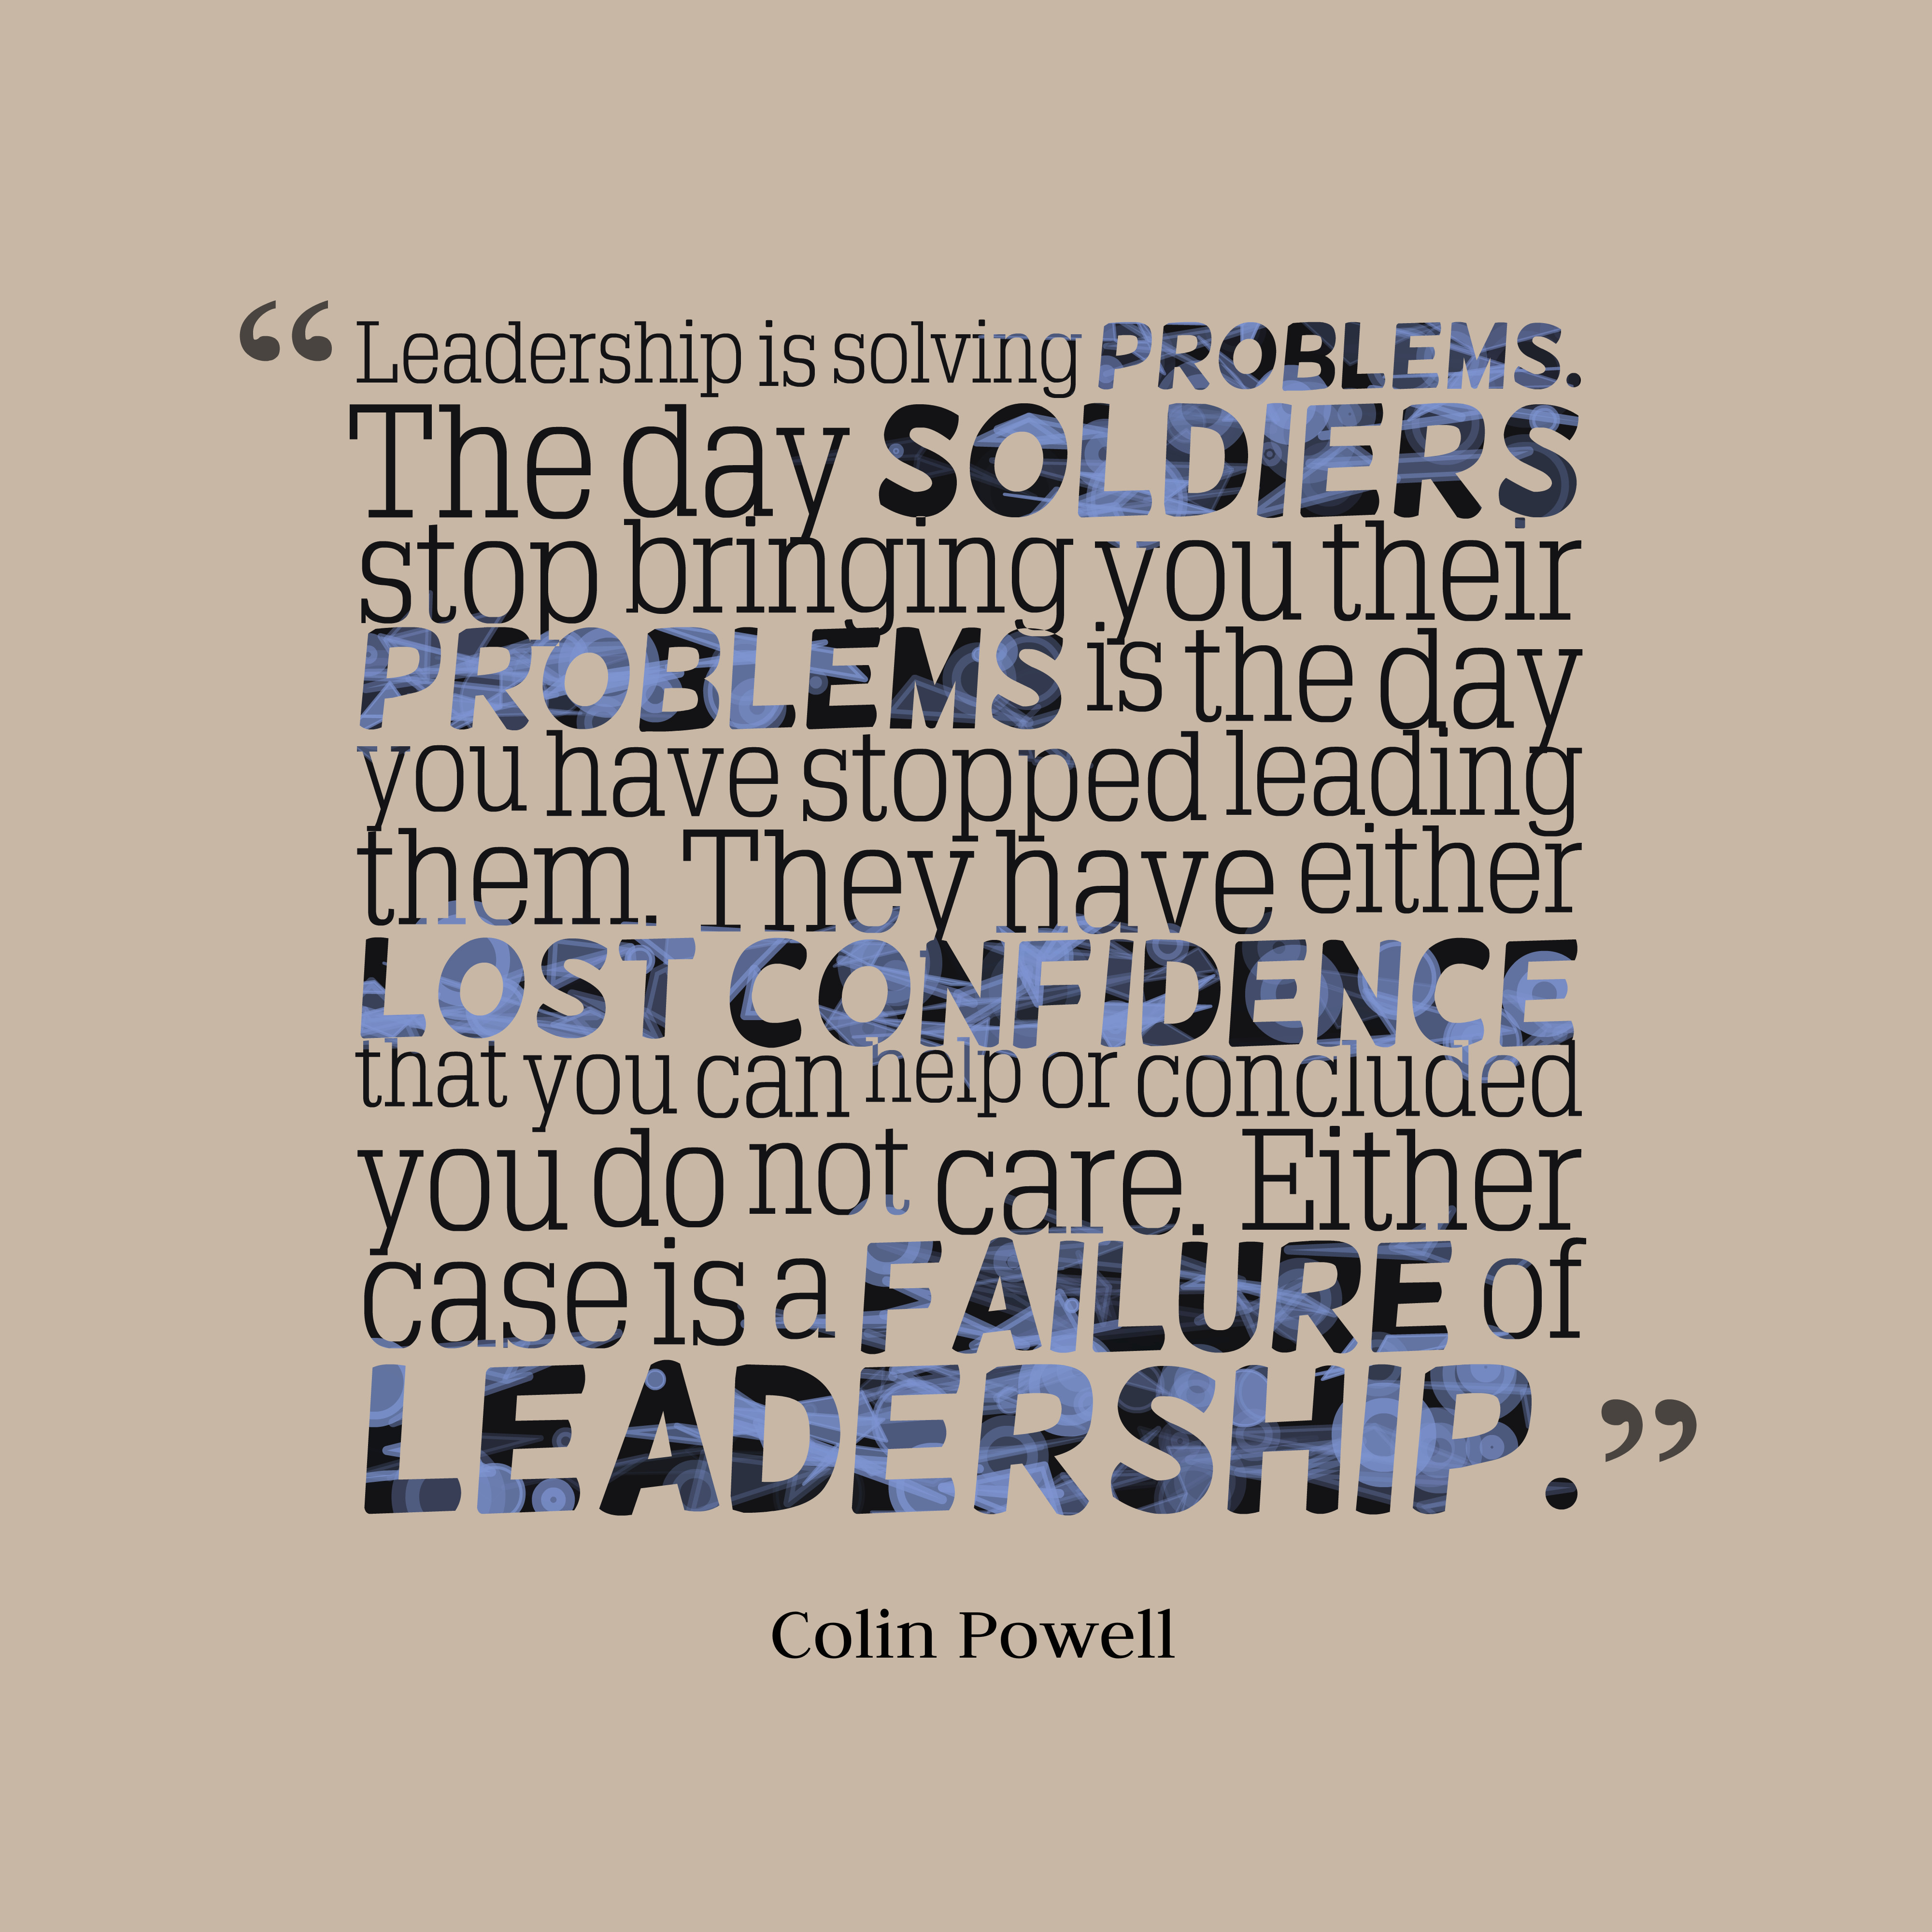 Colin Powell Quotes Leadership
 Colin Powell quote about leadership